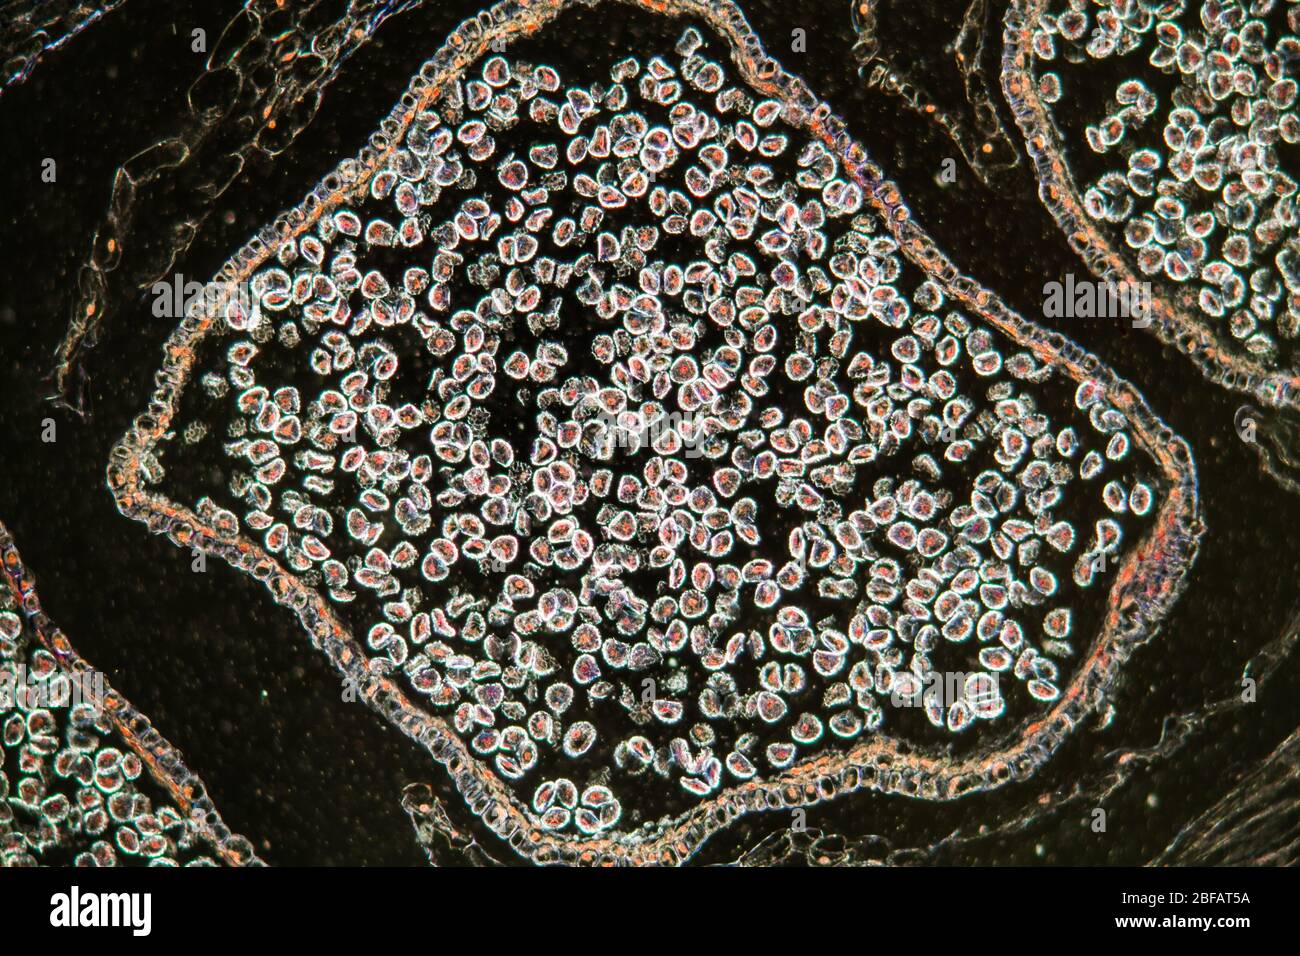 Club moss flower with seeds under the microscope 100x Stock Photo